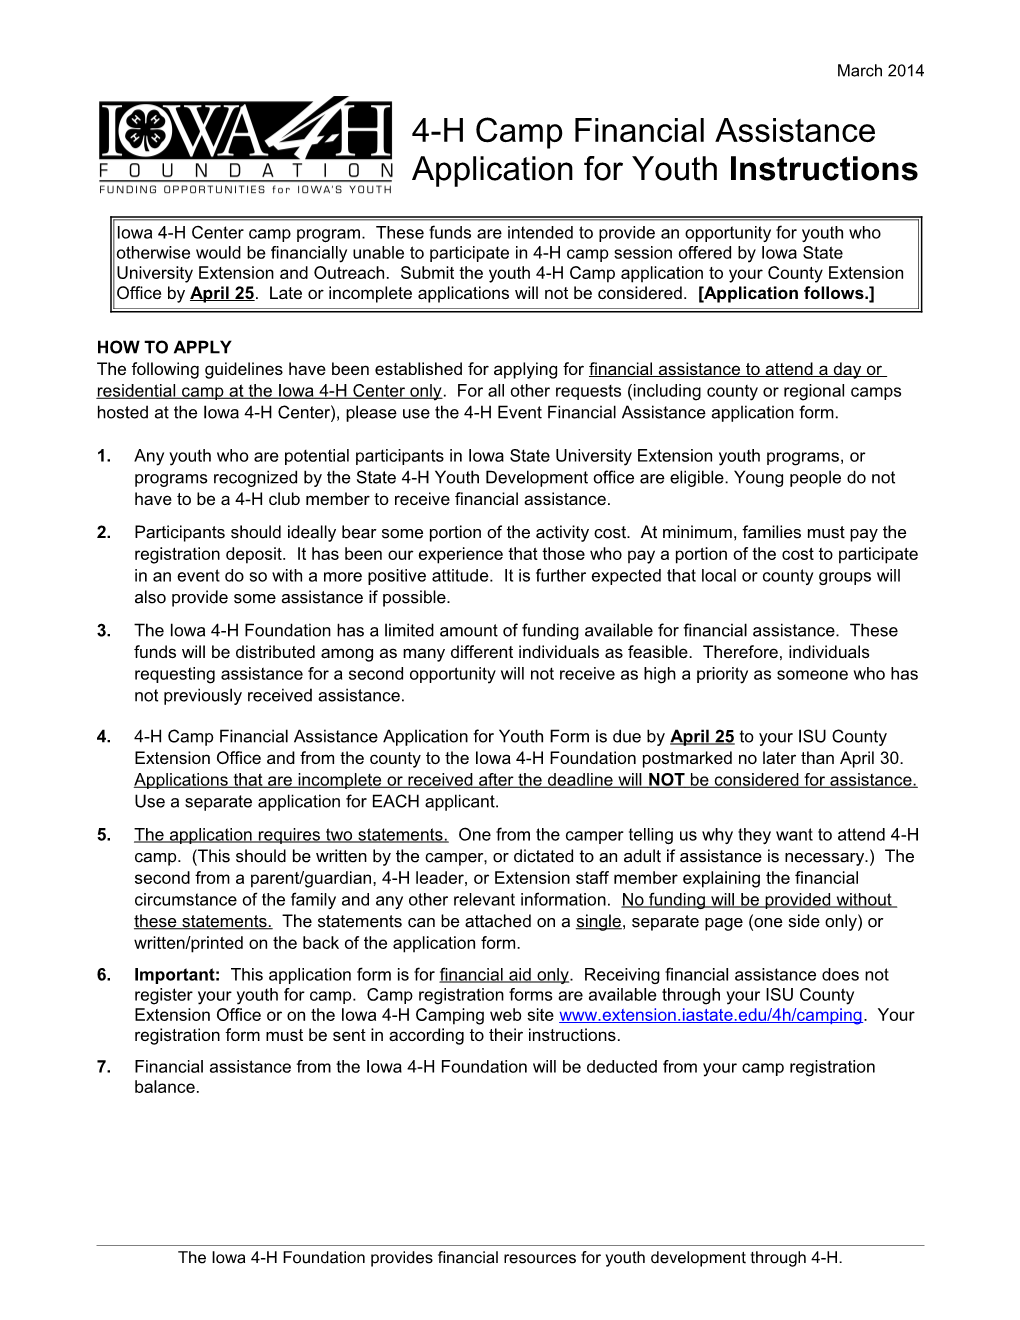 Application for Youth Instructions